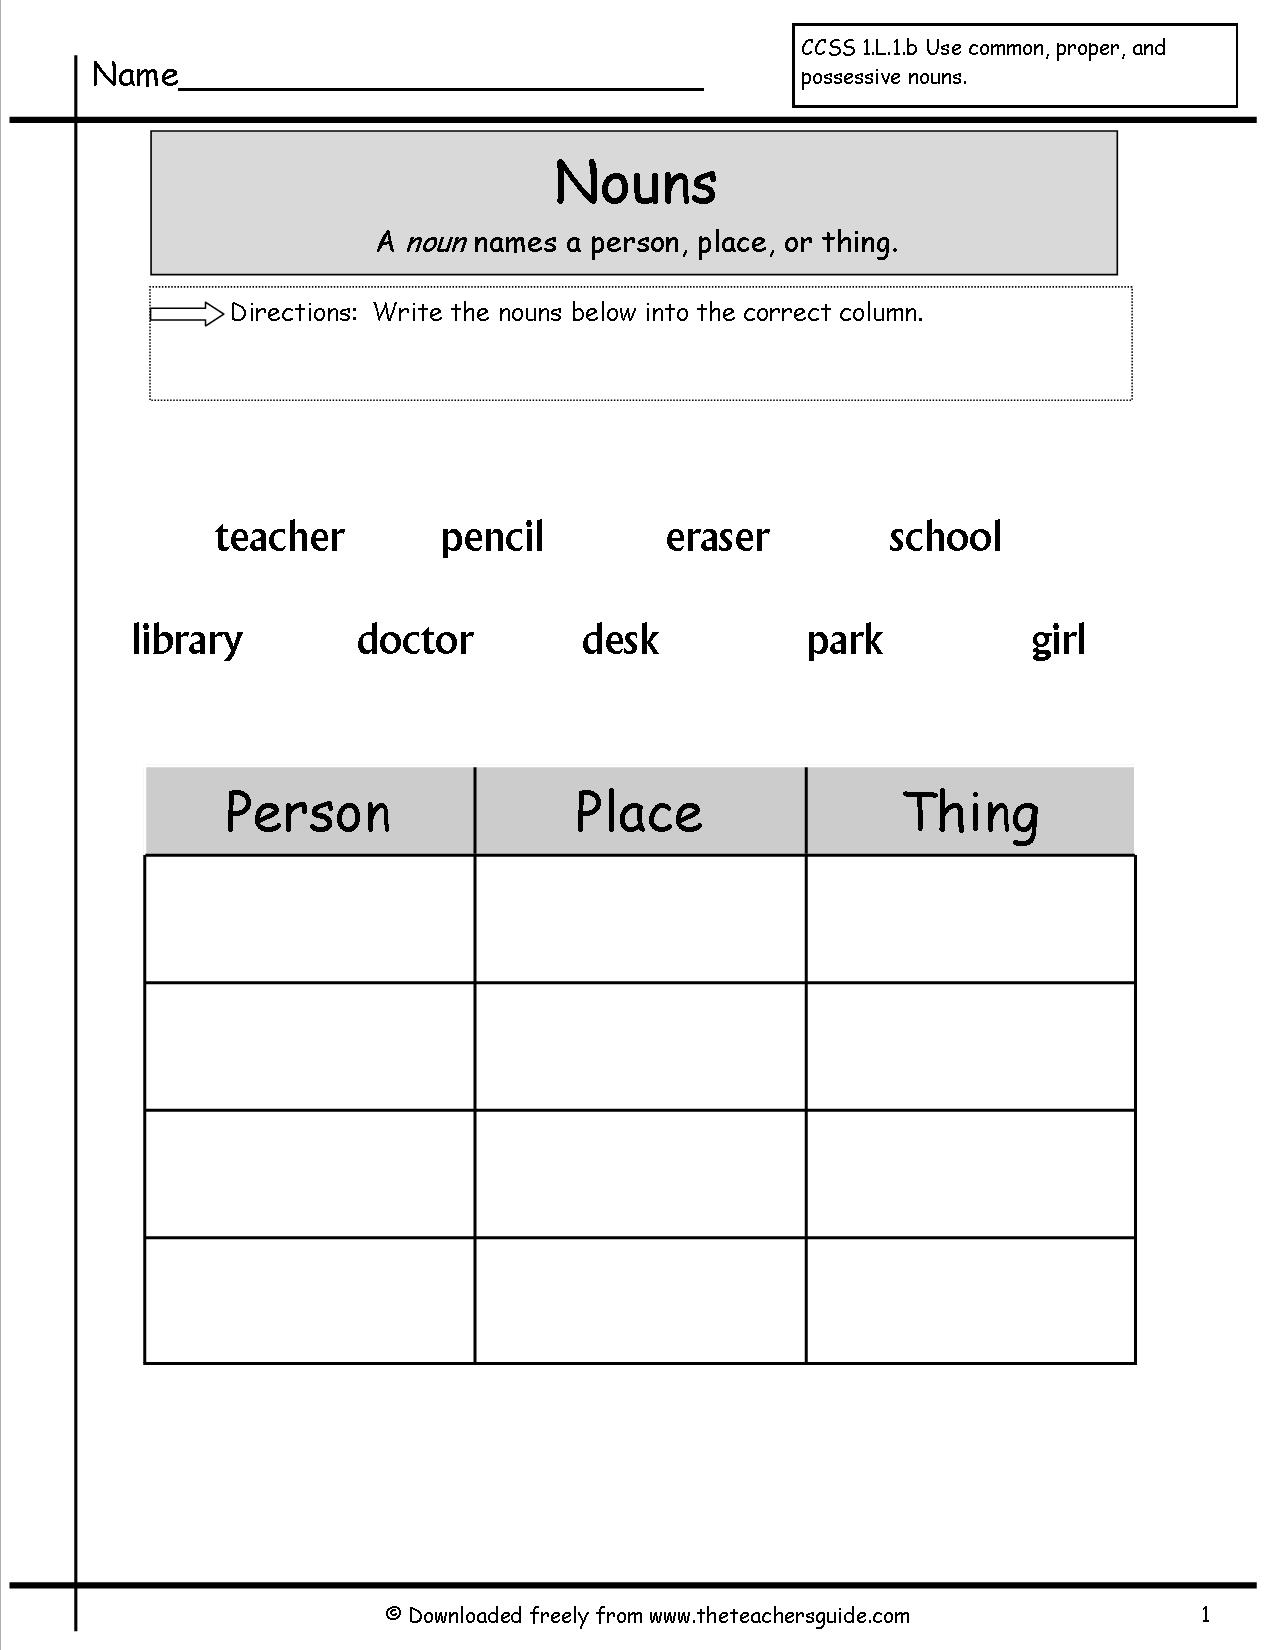 15 Best Images Of Nouns And Verbs Worksheets Sentences Identify Noun 